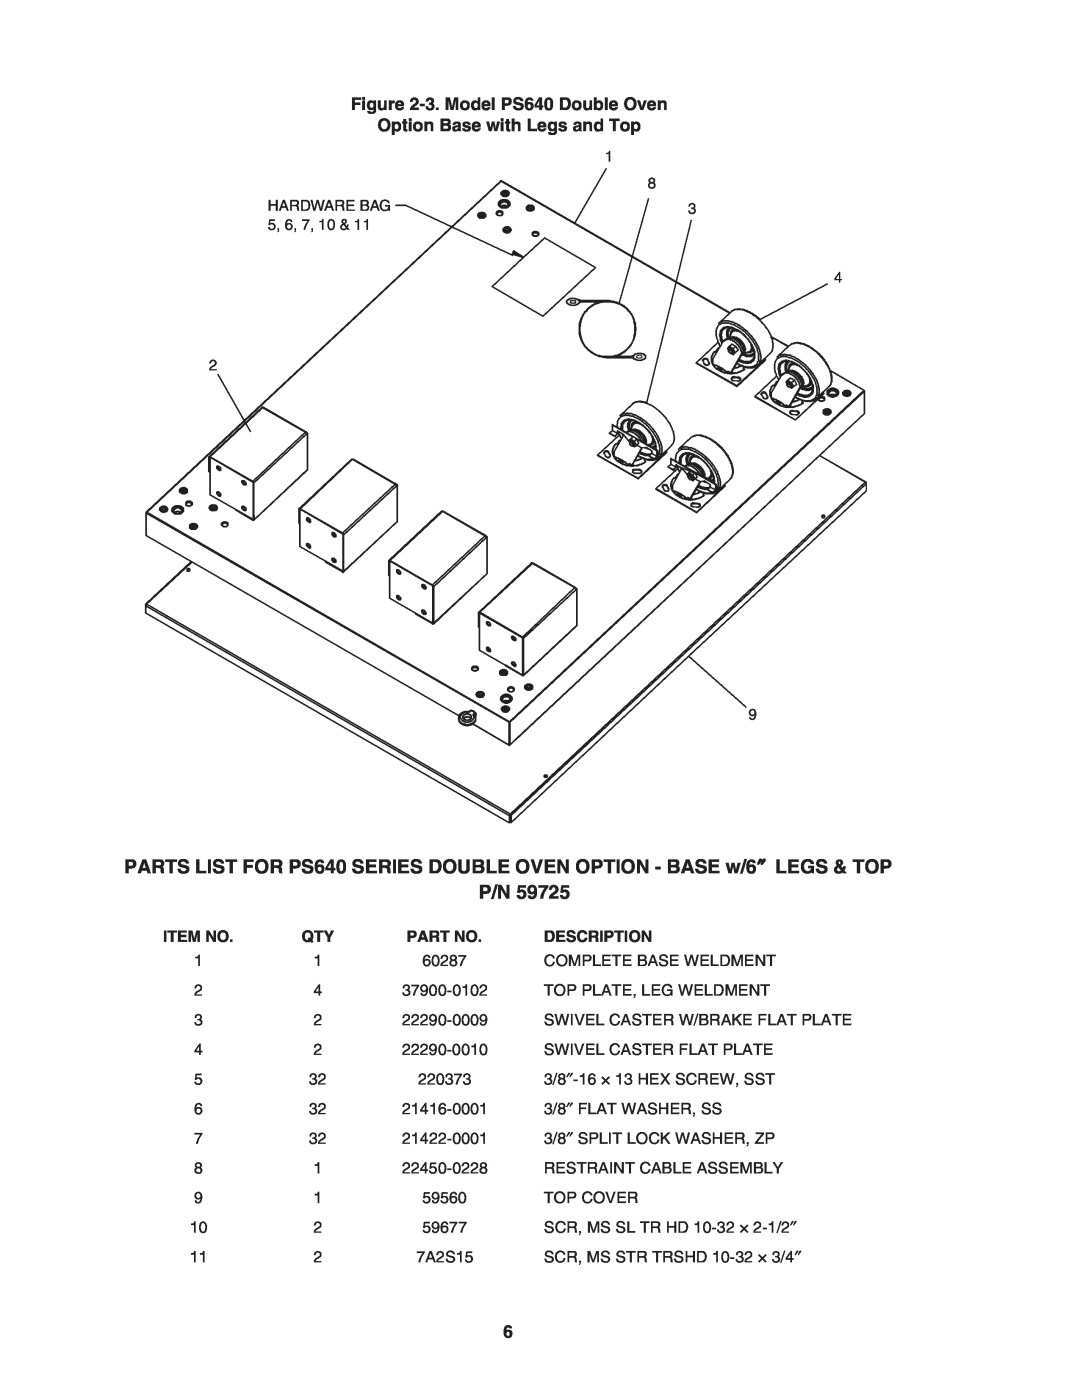 Middleby Marshall PS640E PARTS LIST FOR PS640 SERIES DOUBLE OVEN OPTION - BASE w/6″ LEGS & TOP, Hardware Bag, 5, 6, 7, 10 